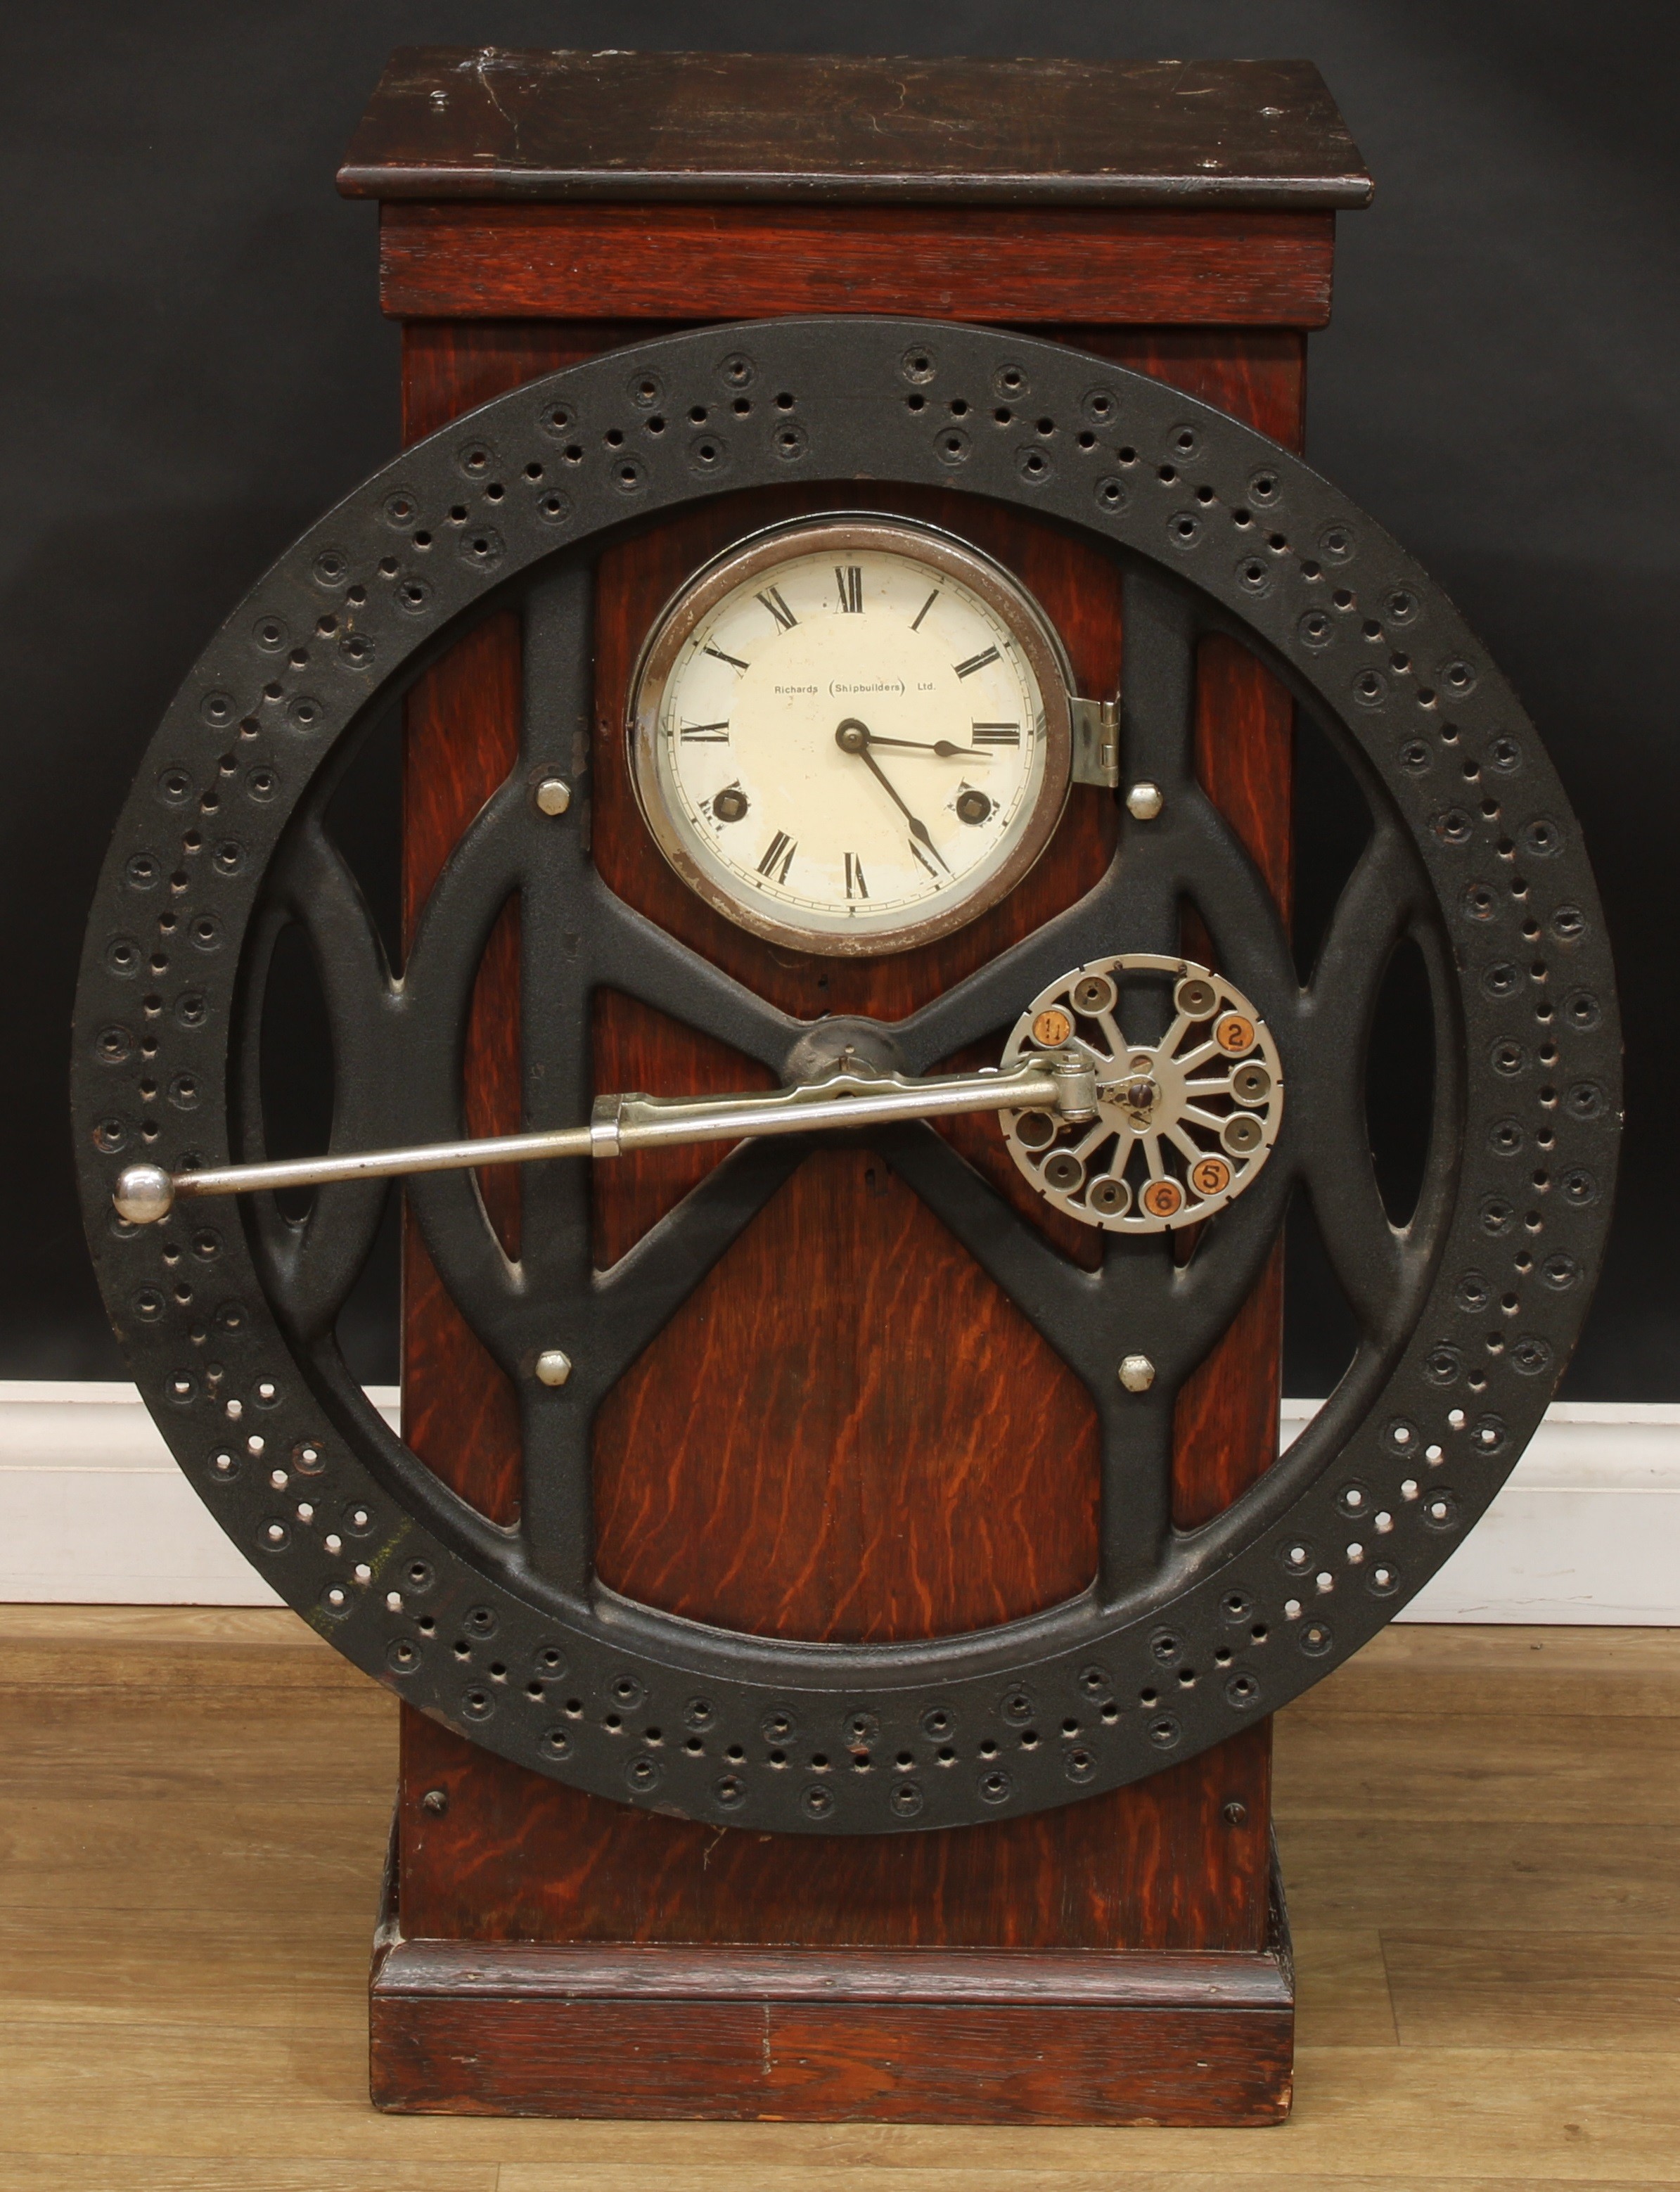 An early to mid-20th century industrial dial recorder or clocking-in machine, 15.5cm clock dial